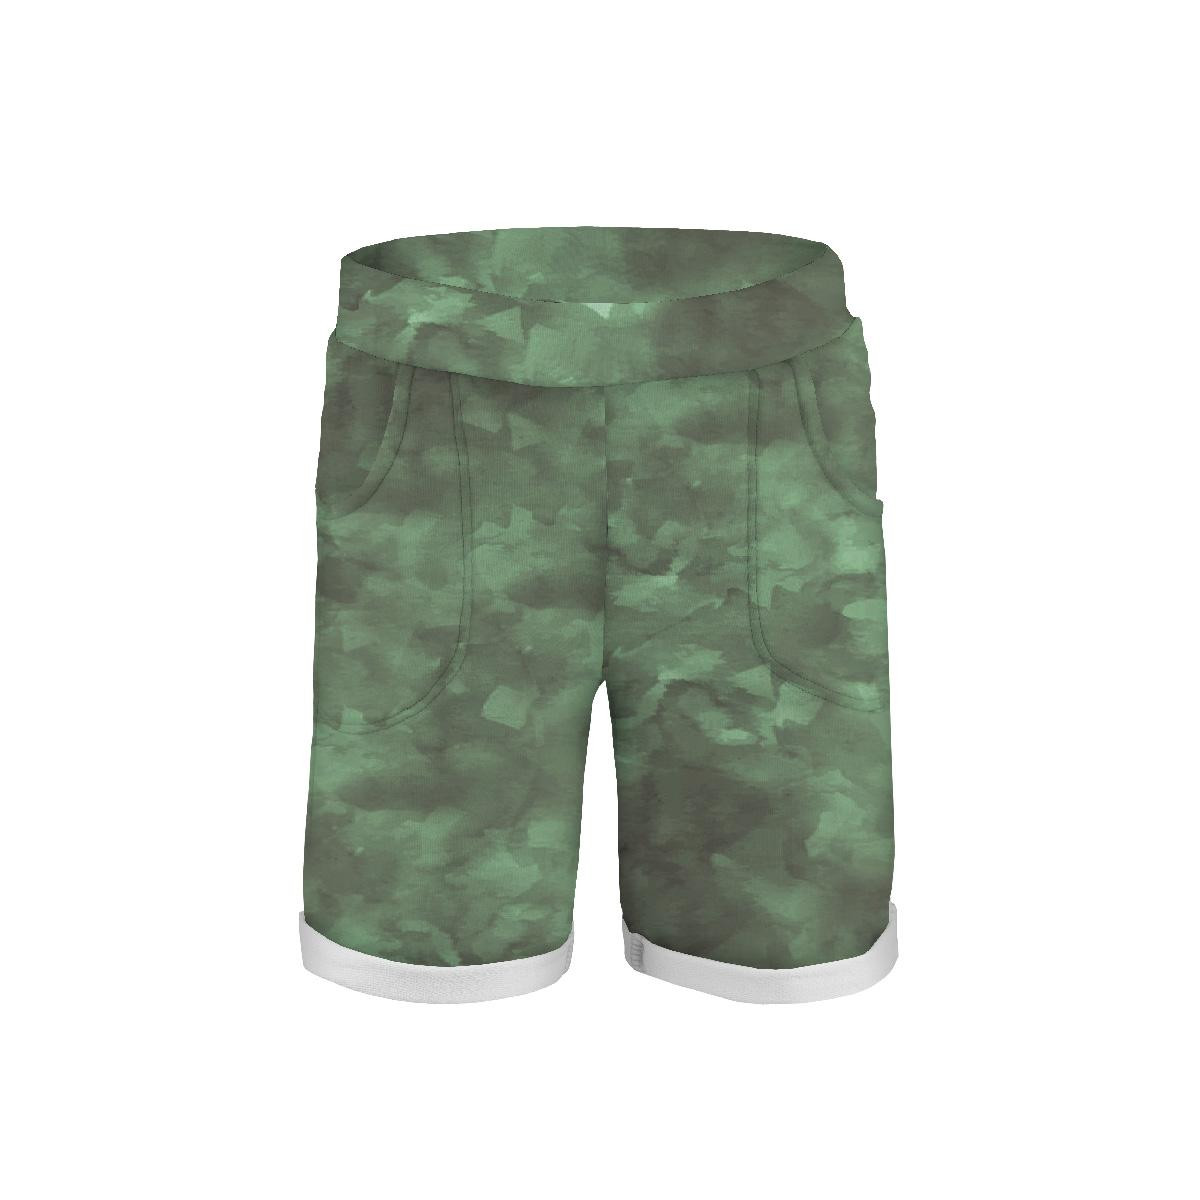 KID`S SHORTS (RIO) - CAMOUFLAGE pat. 2 / olive - looped knit fabric 